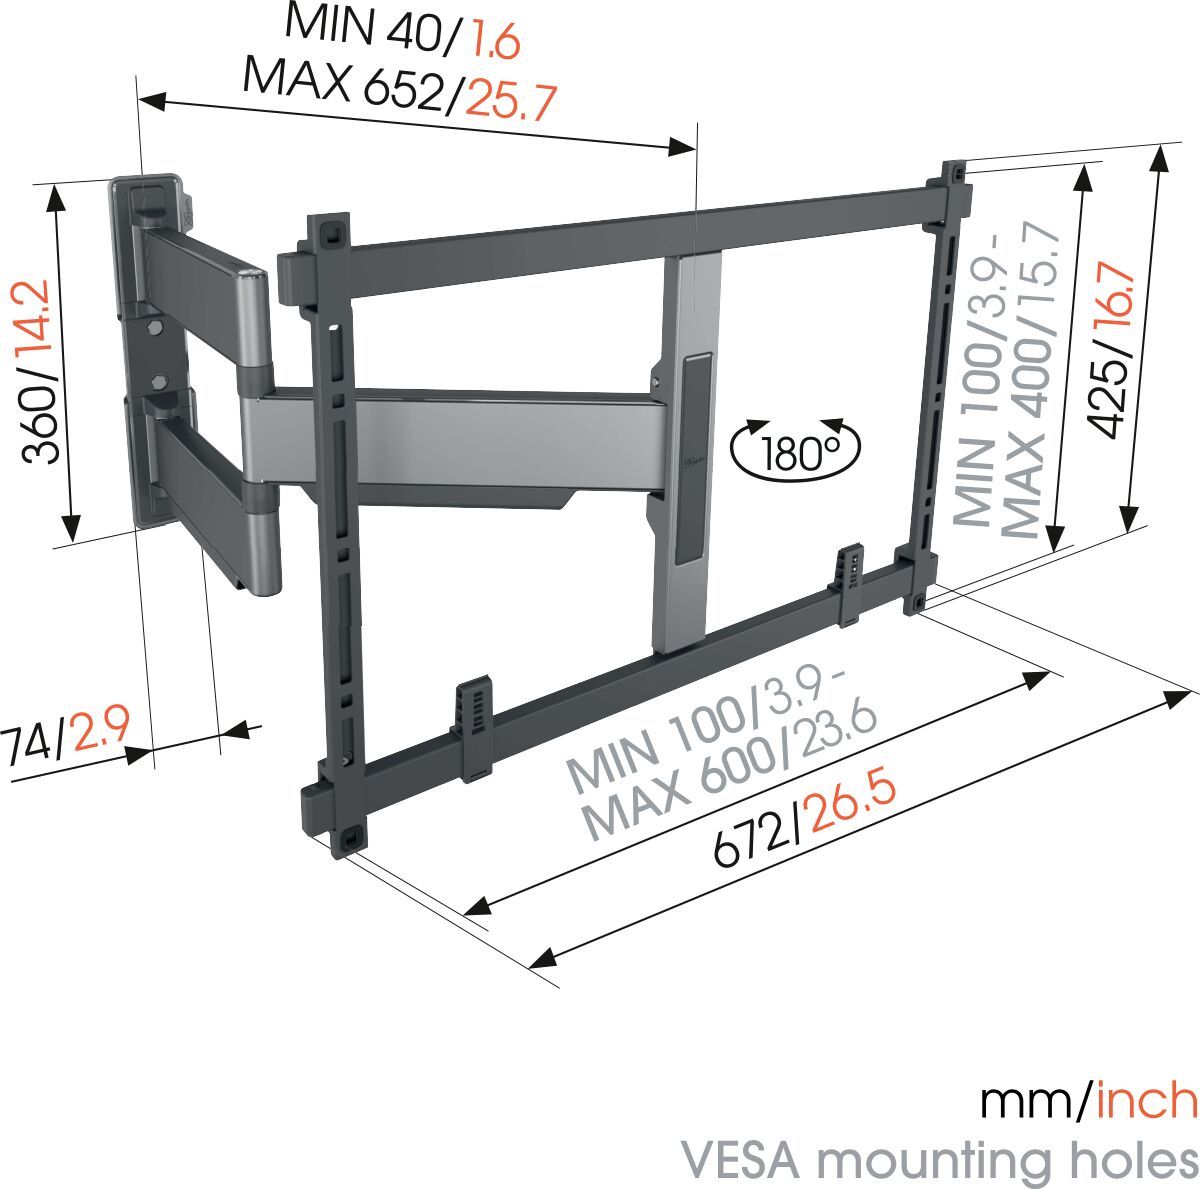 Vogel's TVM 5645 Full-Motion TV Wall Mount (black) - Suitable for 40 up to 77 inch TVs - Full motion (up to 180°) swivel - Dimensions